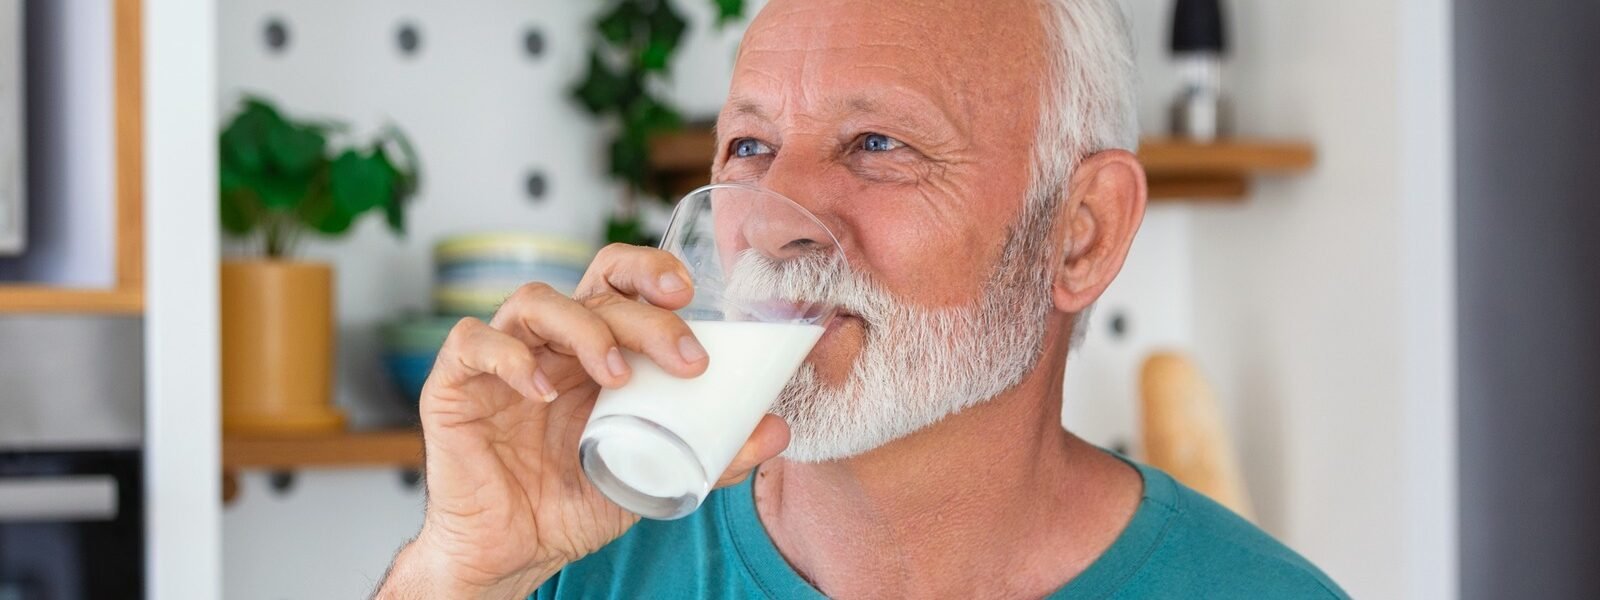 When You Stop Drinking Milk, This Is What Happens To Your Early Death Risk - Health Digest